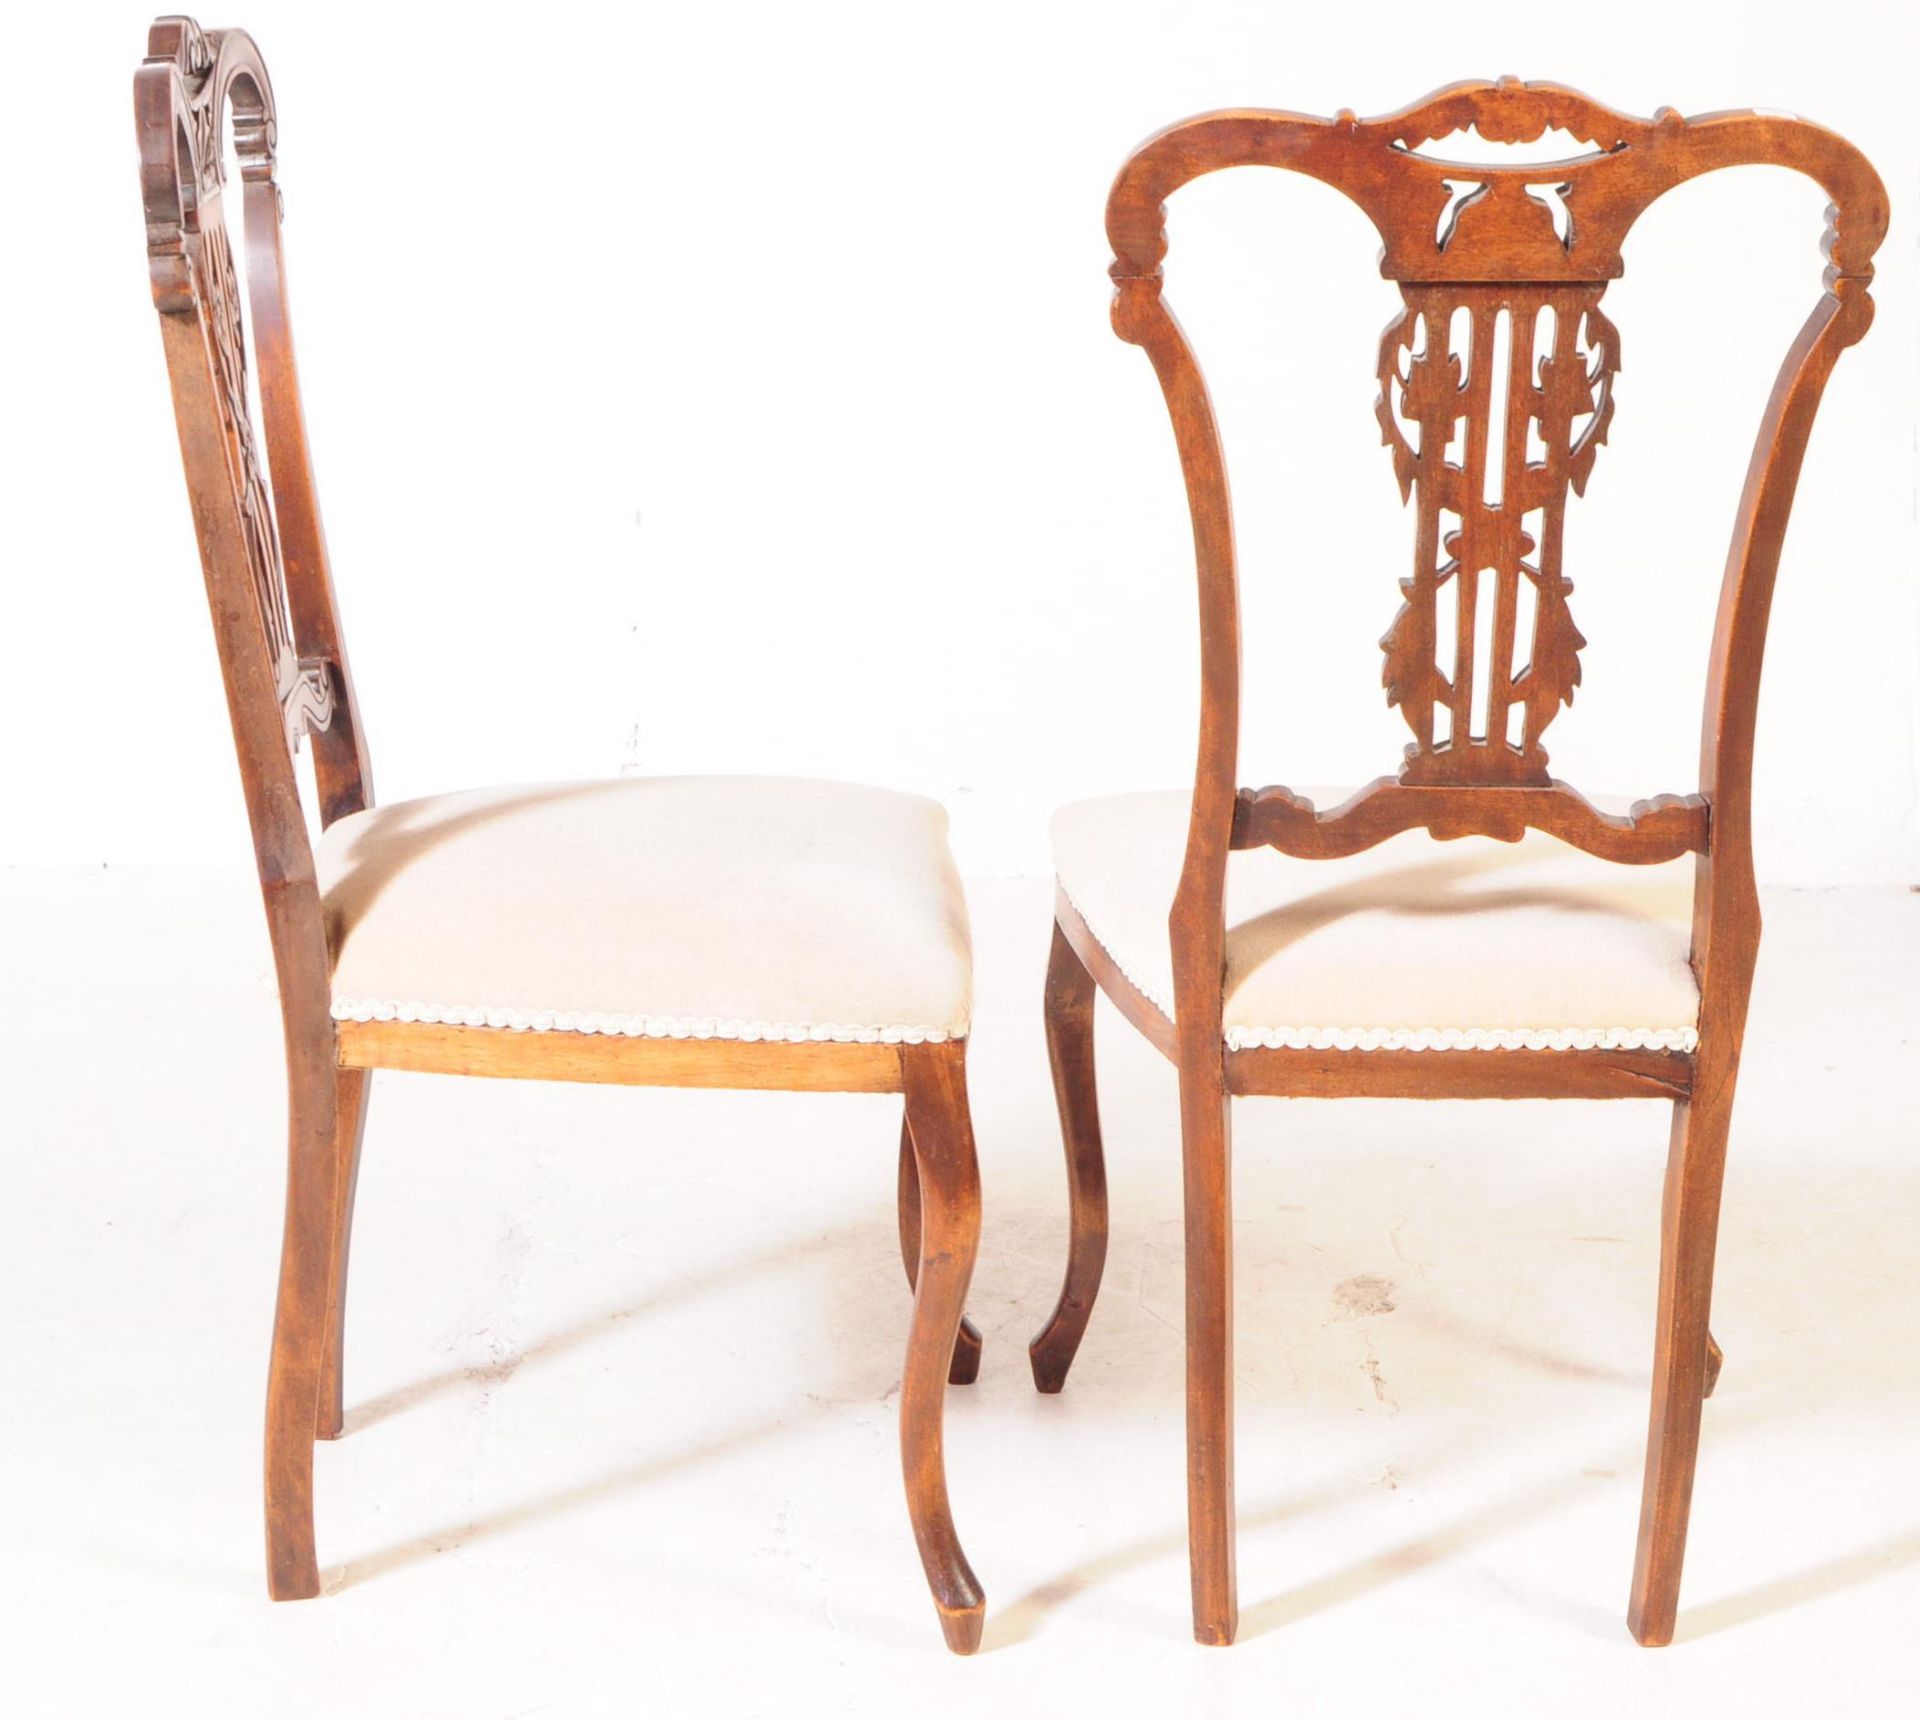 FOUR LATE 19TH CENTURY CHIPPENDALE STYLE DINING CHAIRS - Image 4 of 6